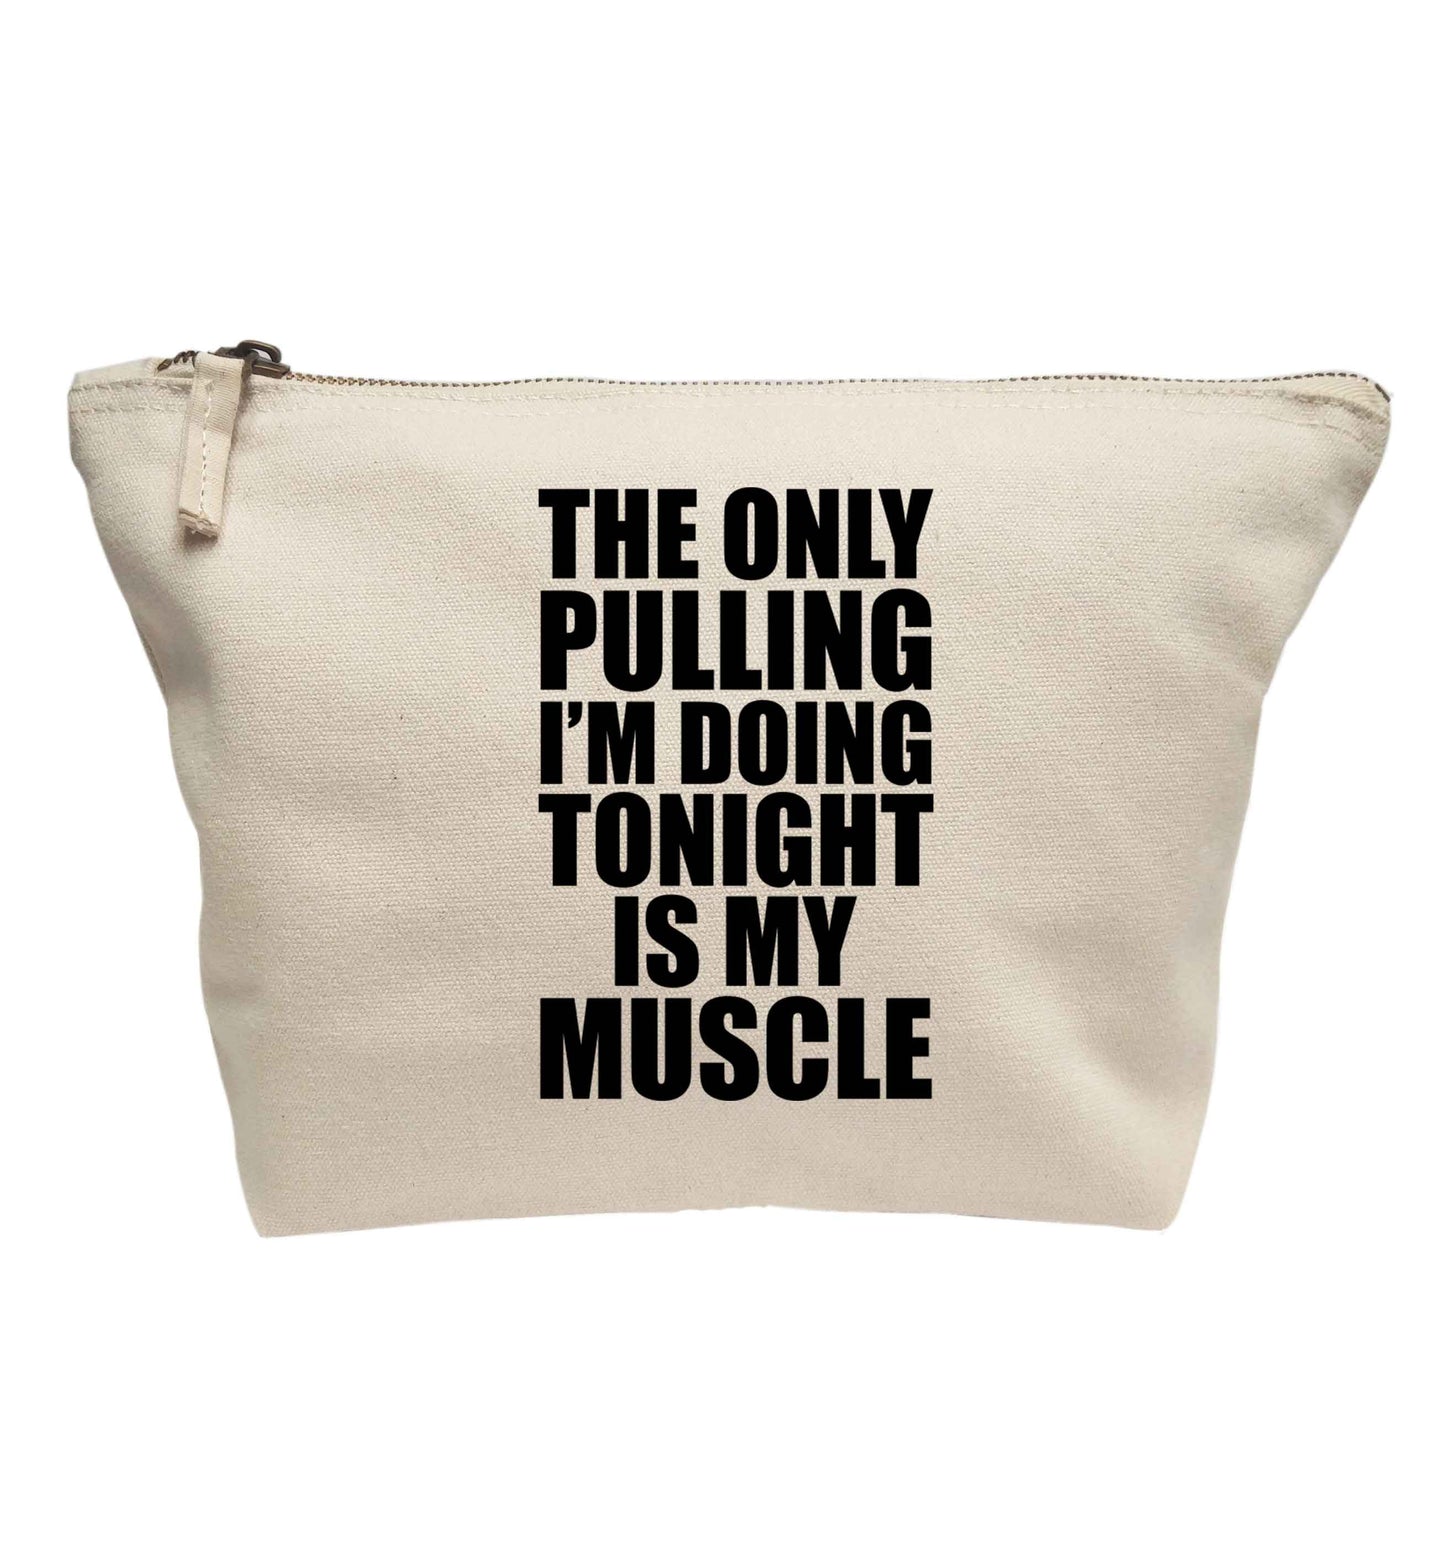 The only pulling I'm doing tonight is my muscle | Makeup / wash bag